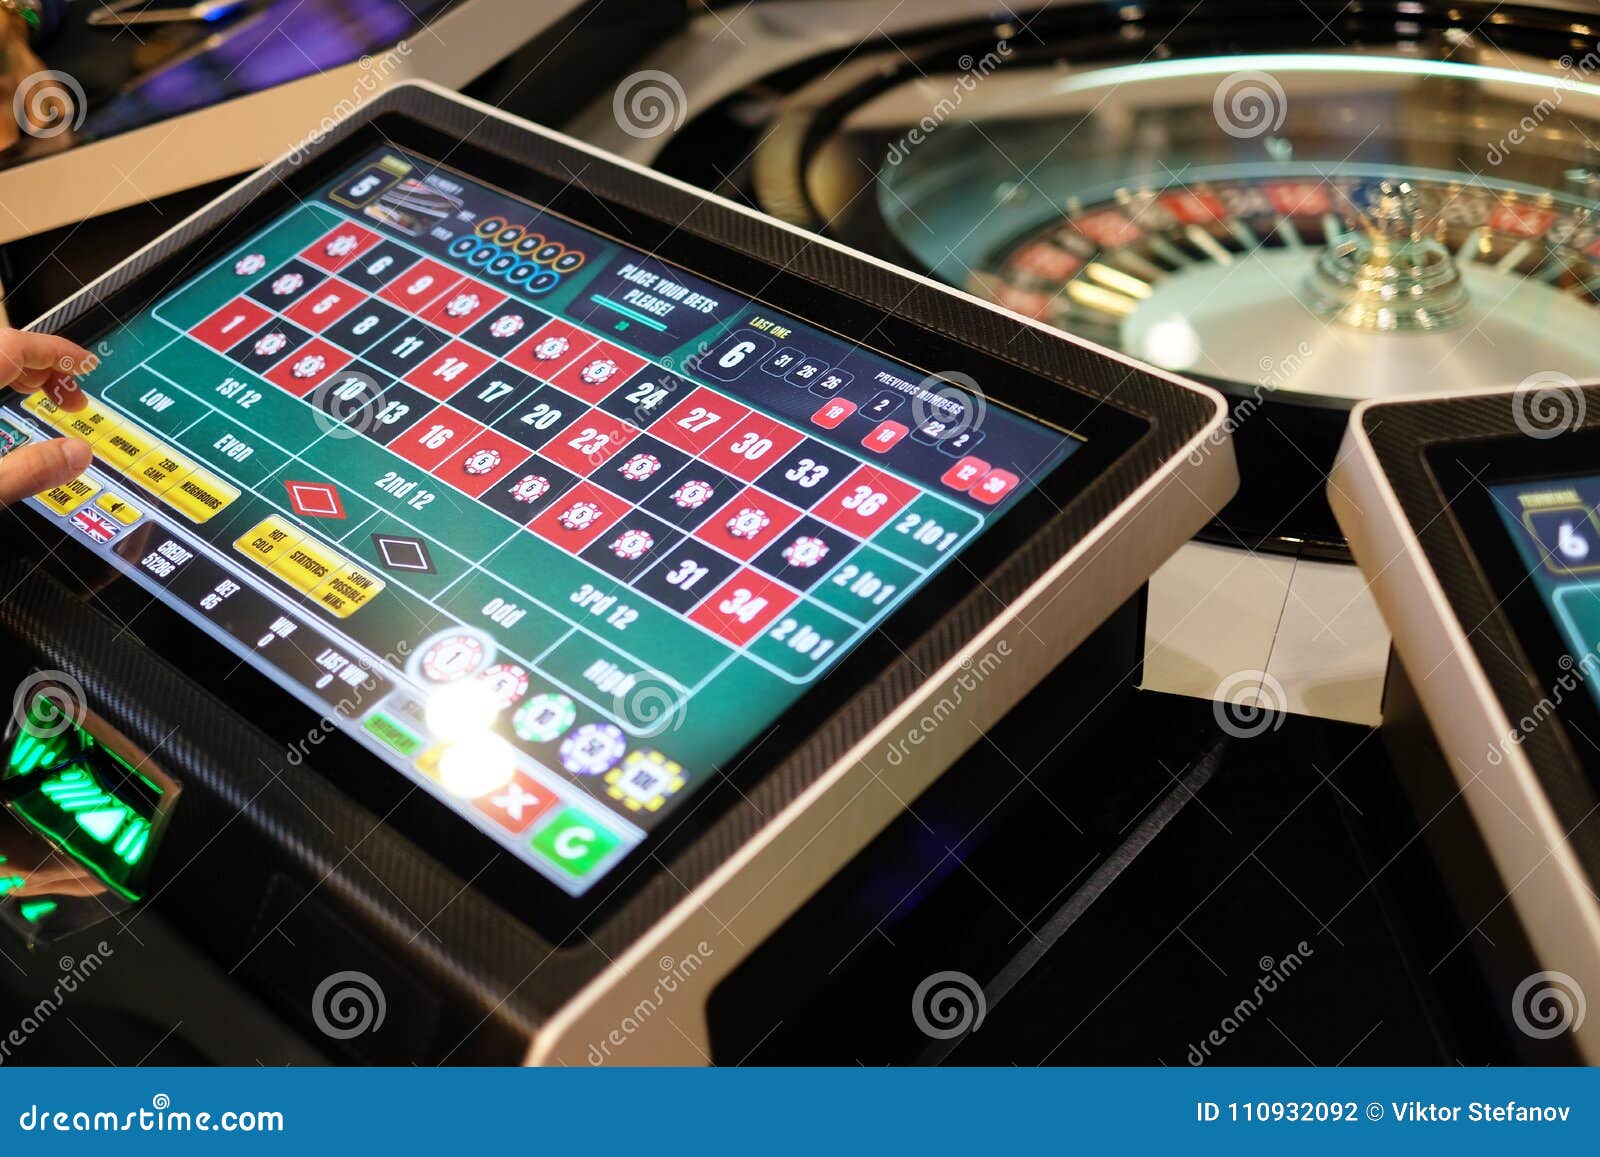 How to play electronic roulette in casino